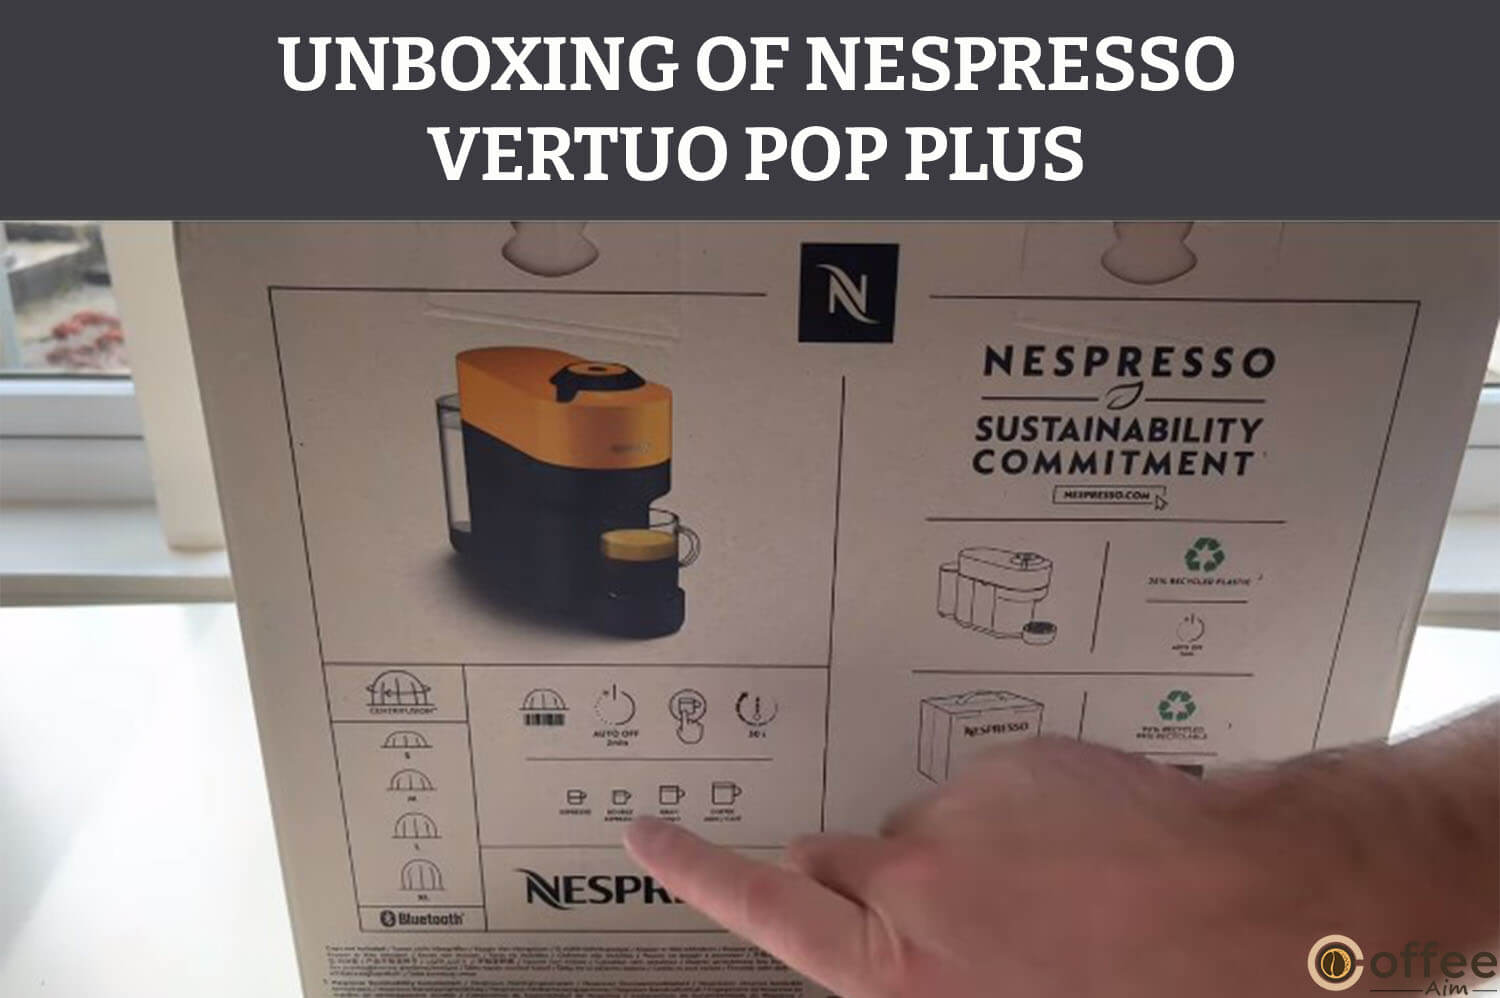 The image depicts the box description for the article titled "Unboxing of Nespresso Vertuo Pop+."